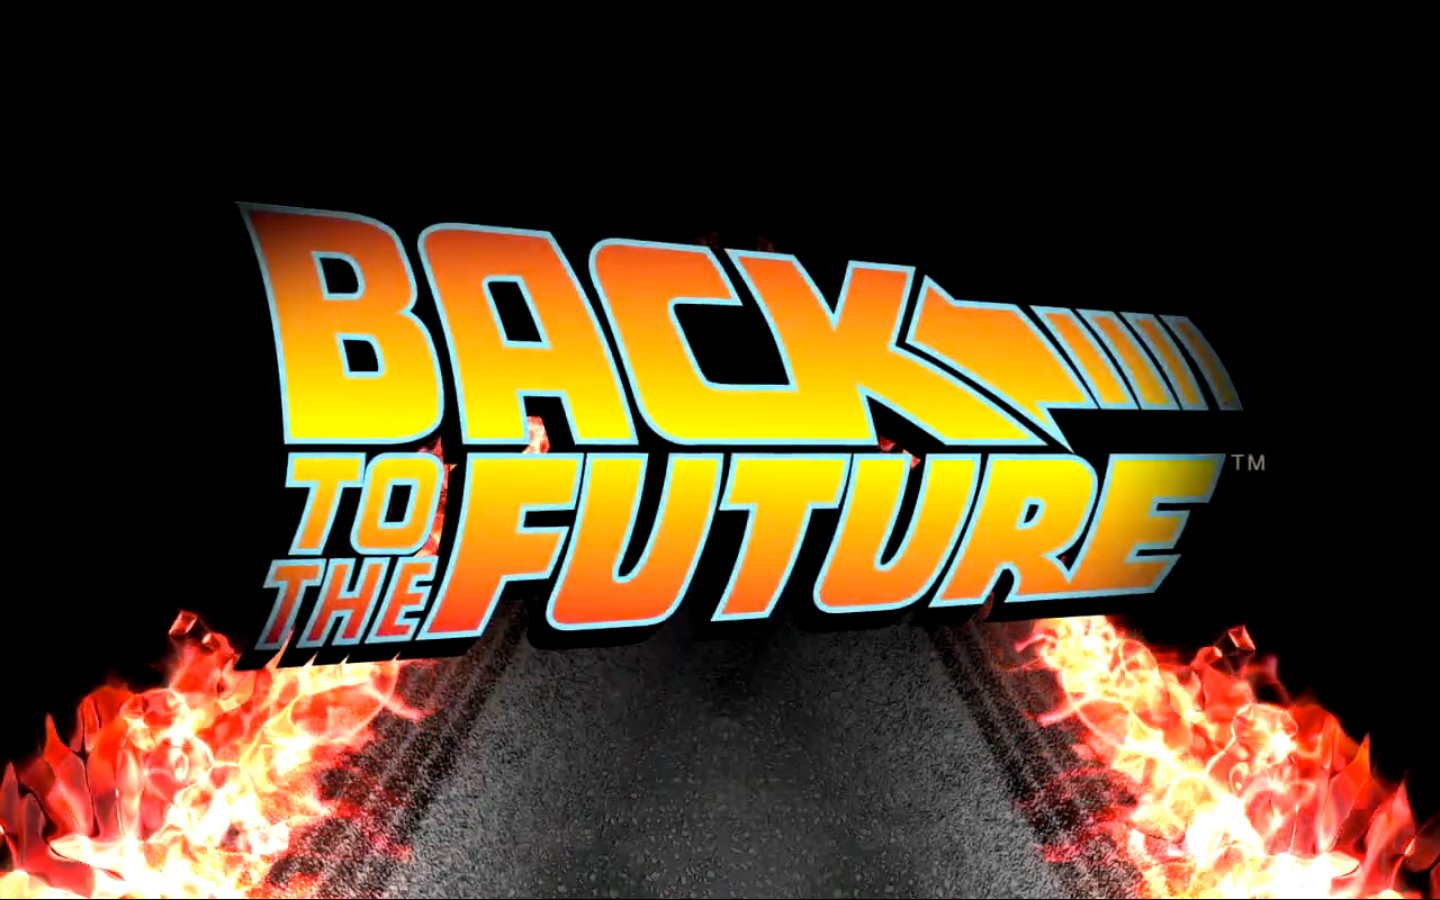 Back To The Future Wallpaper 1920x1080 Download Wallpaper 1440x900